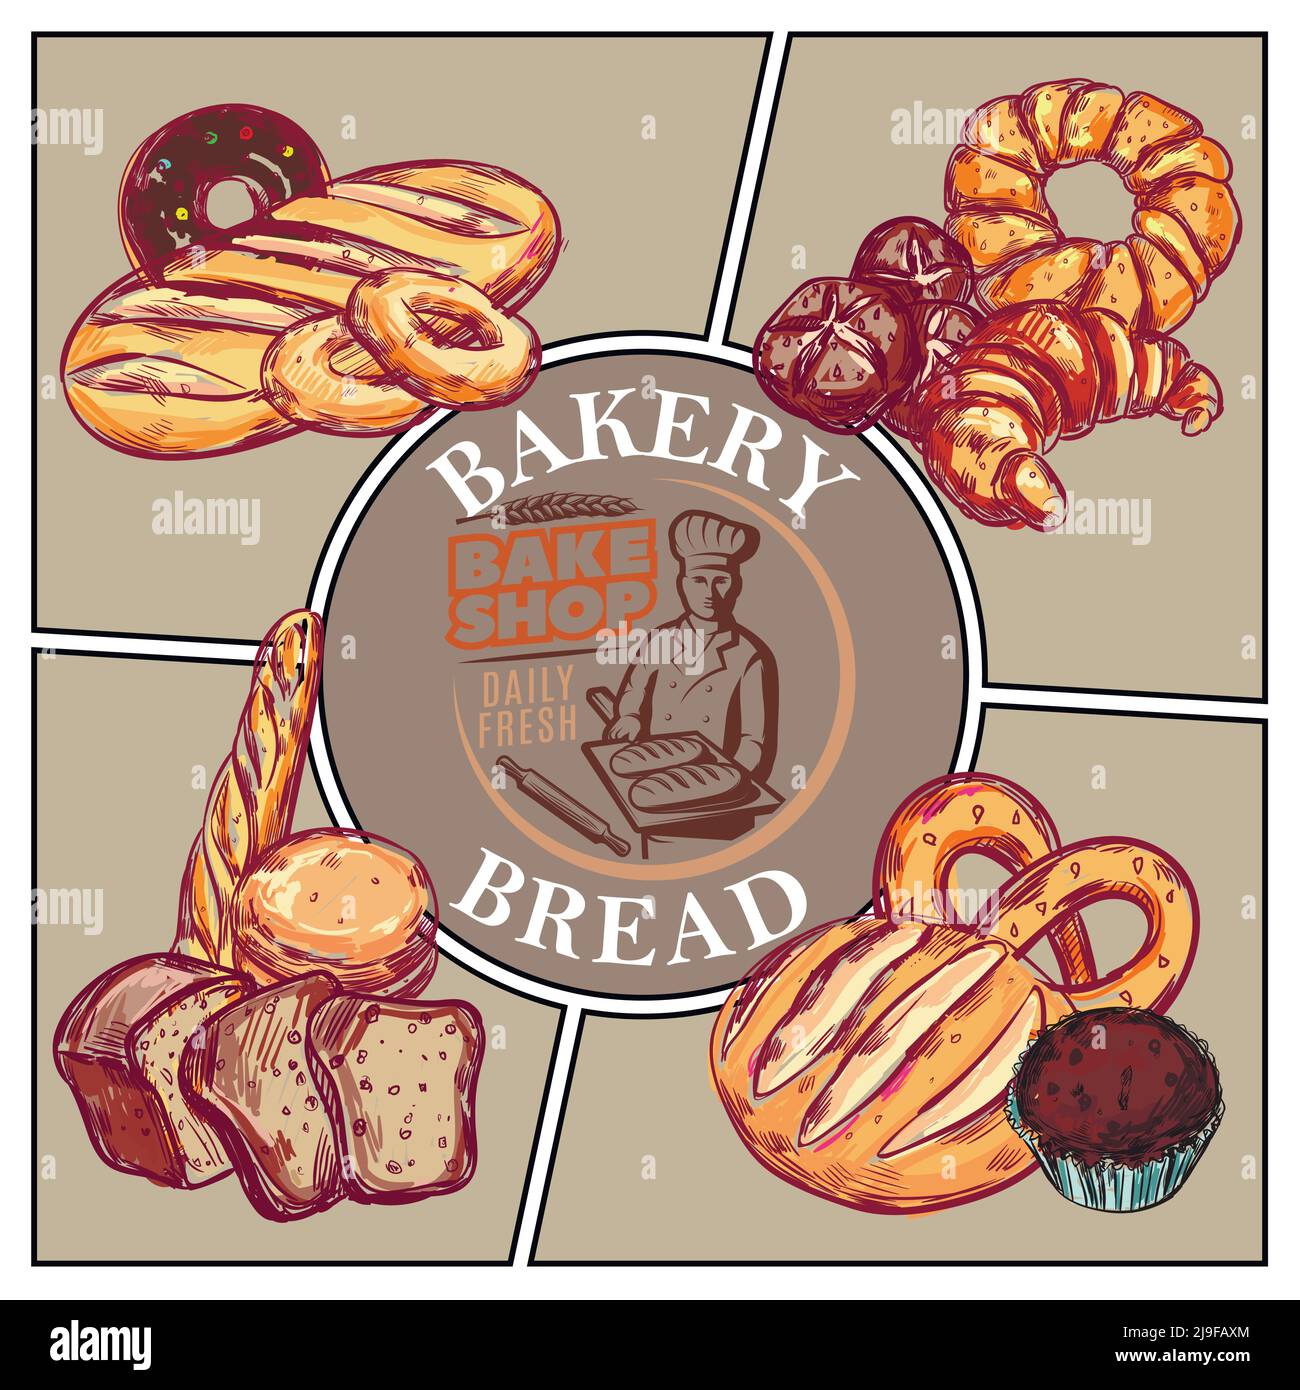 Sketch bakery products concept with bread french baguette croissant bagel donut muffin pretzel and bake shop emblem vector illustration Stock Vector